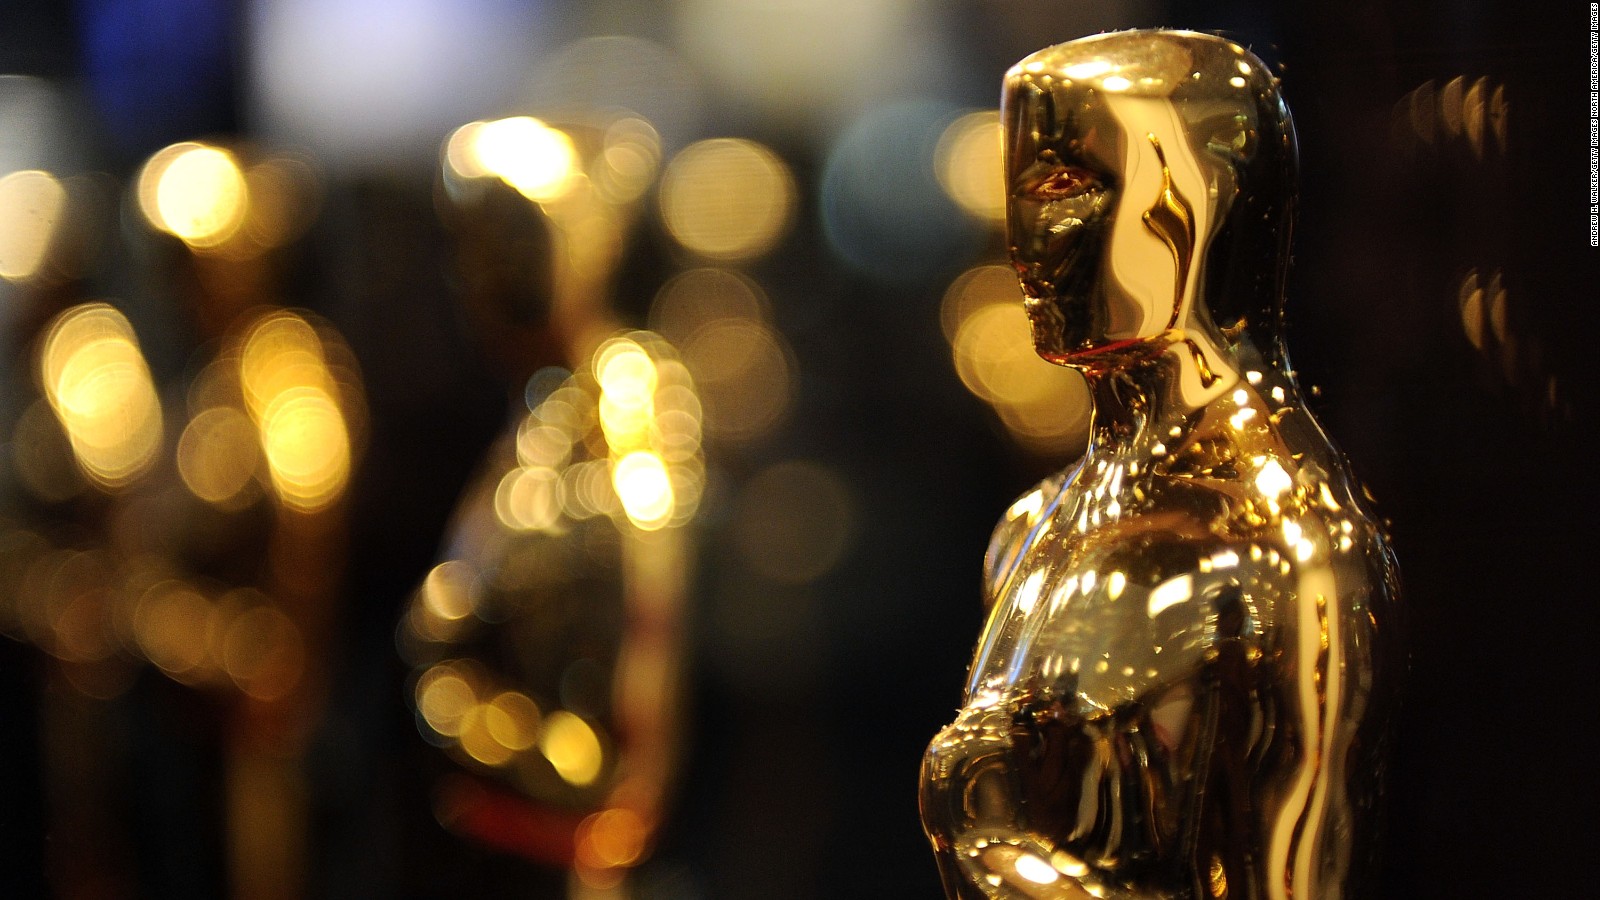 Marketing Trends Demonstrated in This Year’s Oscars